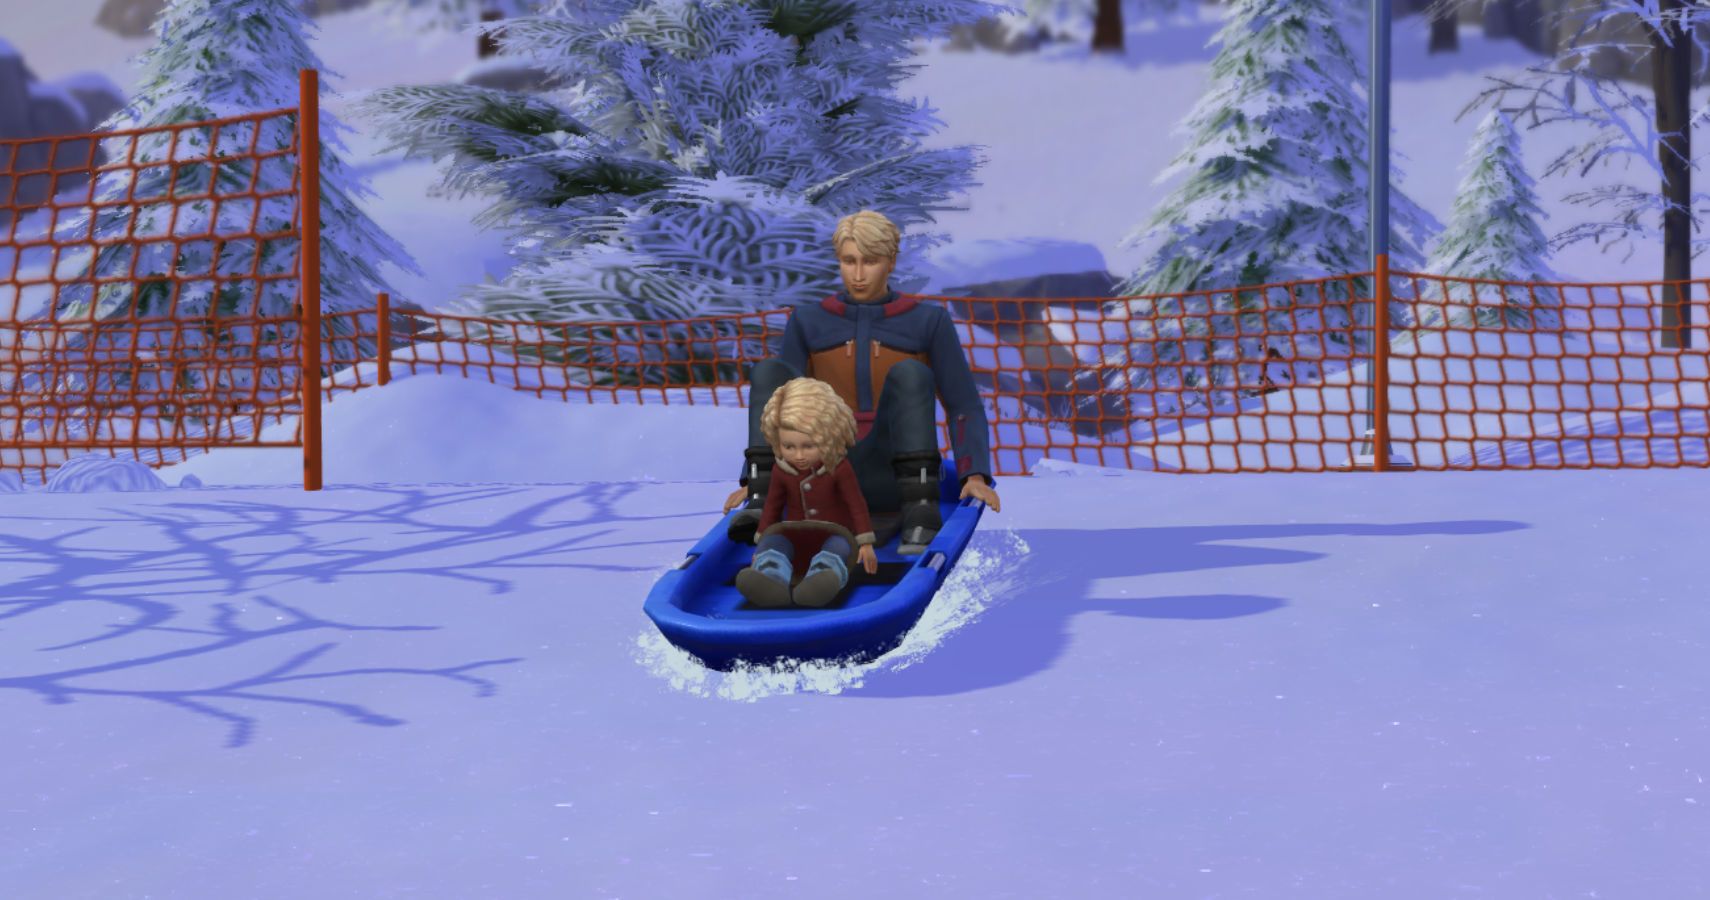 A sim sledding with a toddler down the bunny slope.